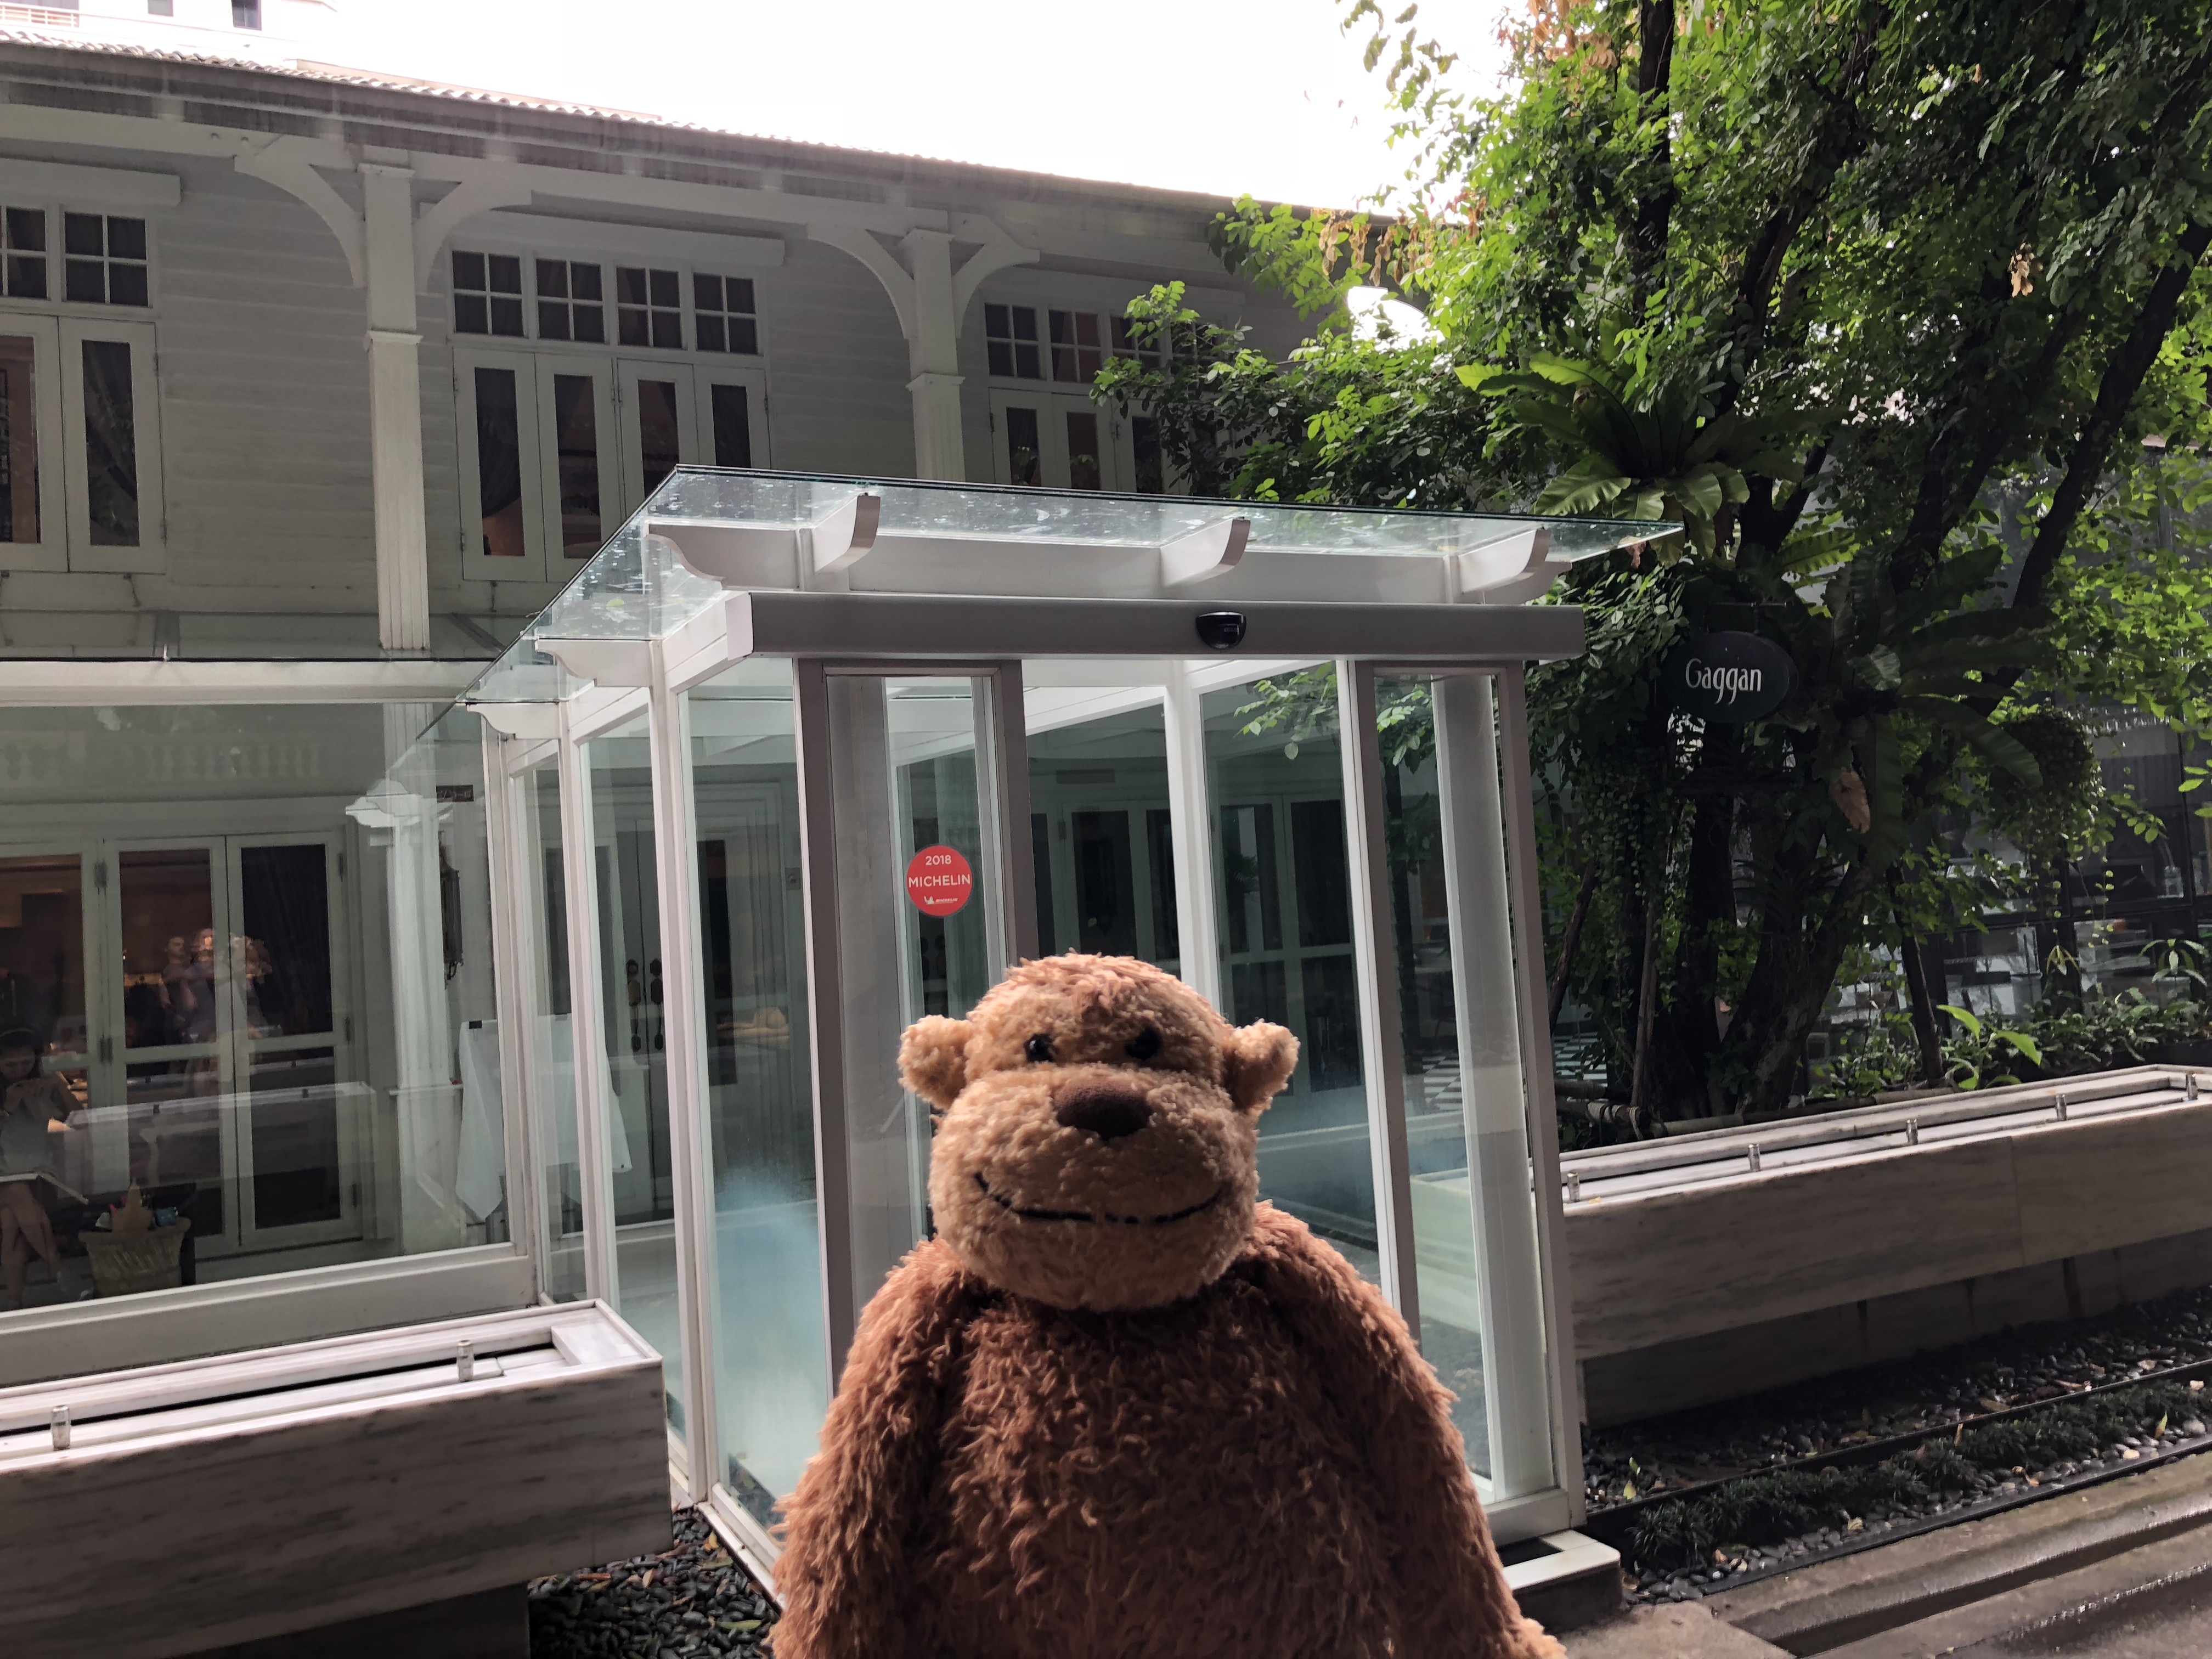 a stuffed animal in front of a building